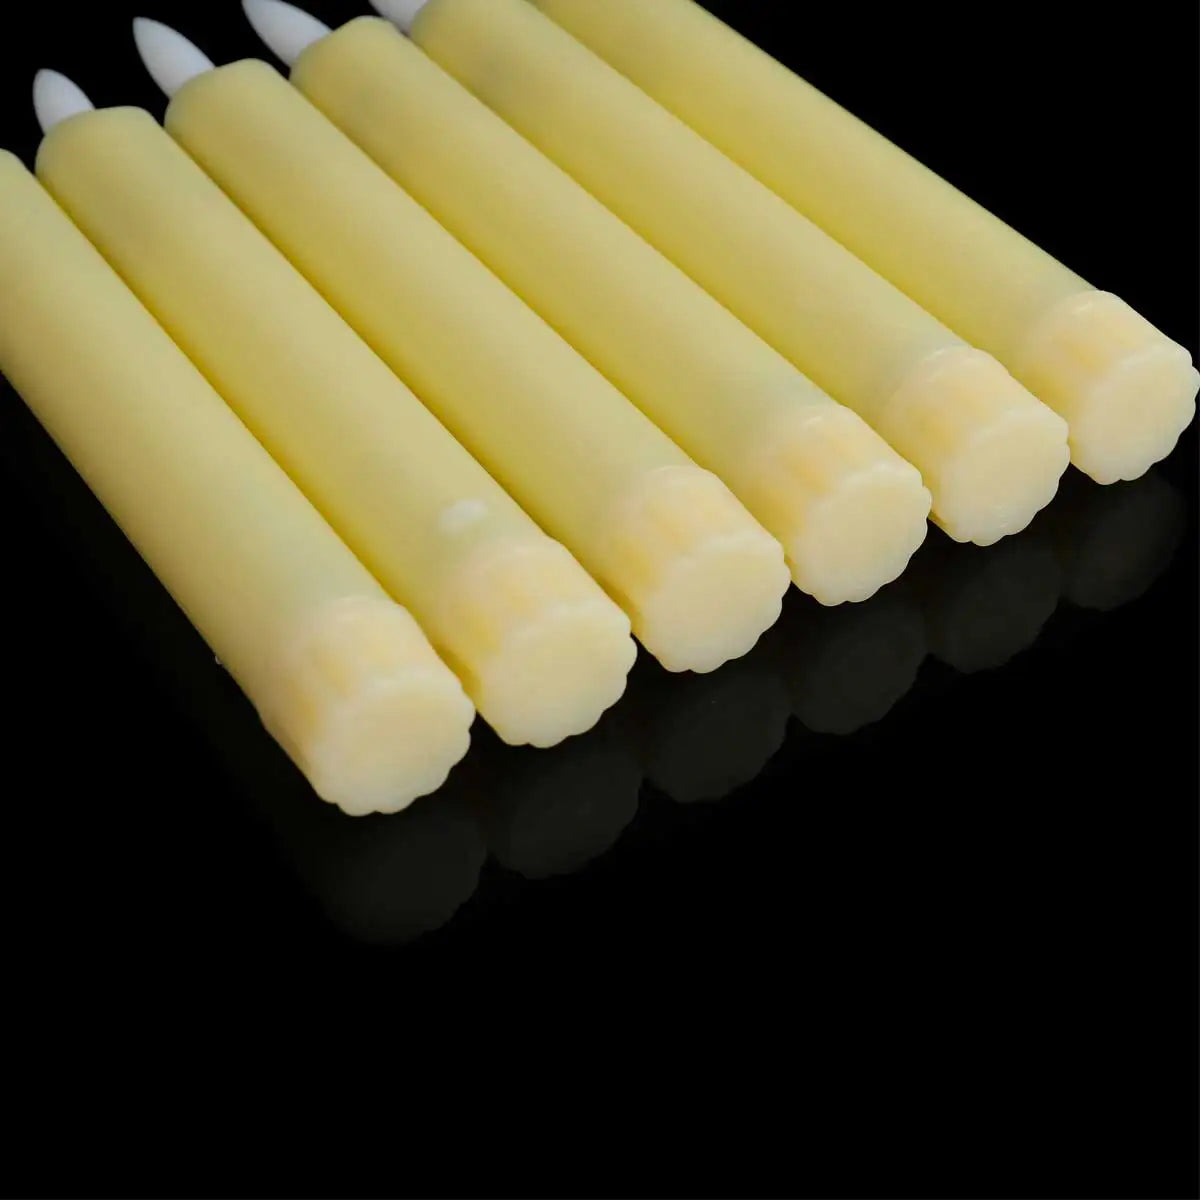 Pack of 2 Black Flameless 6.5 inch/16.5 cm Short LED Taper Candles For Halloween,Battery Operated Powered White/Beige LED Candle